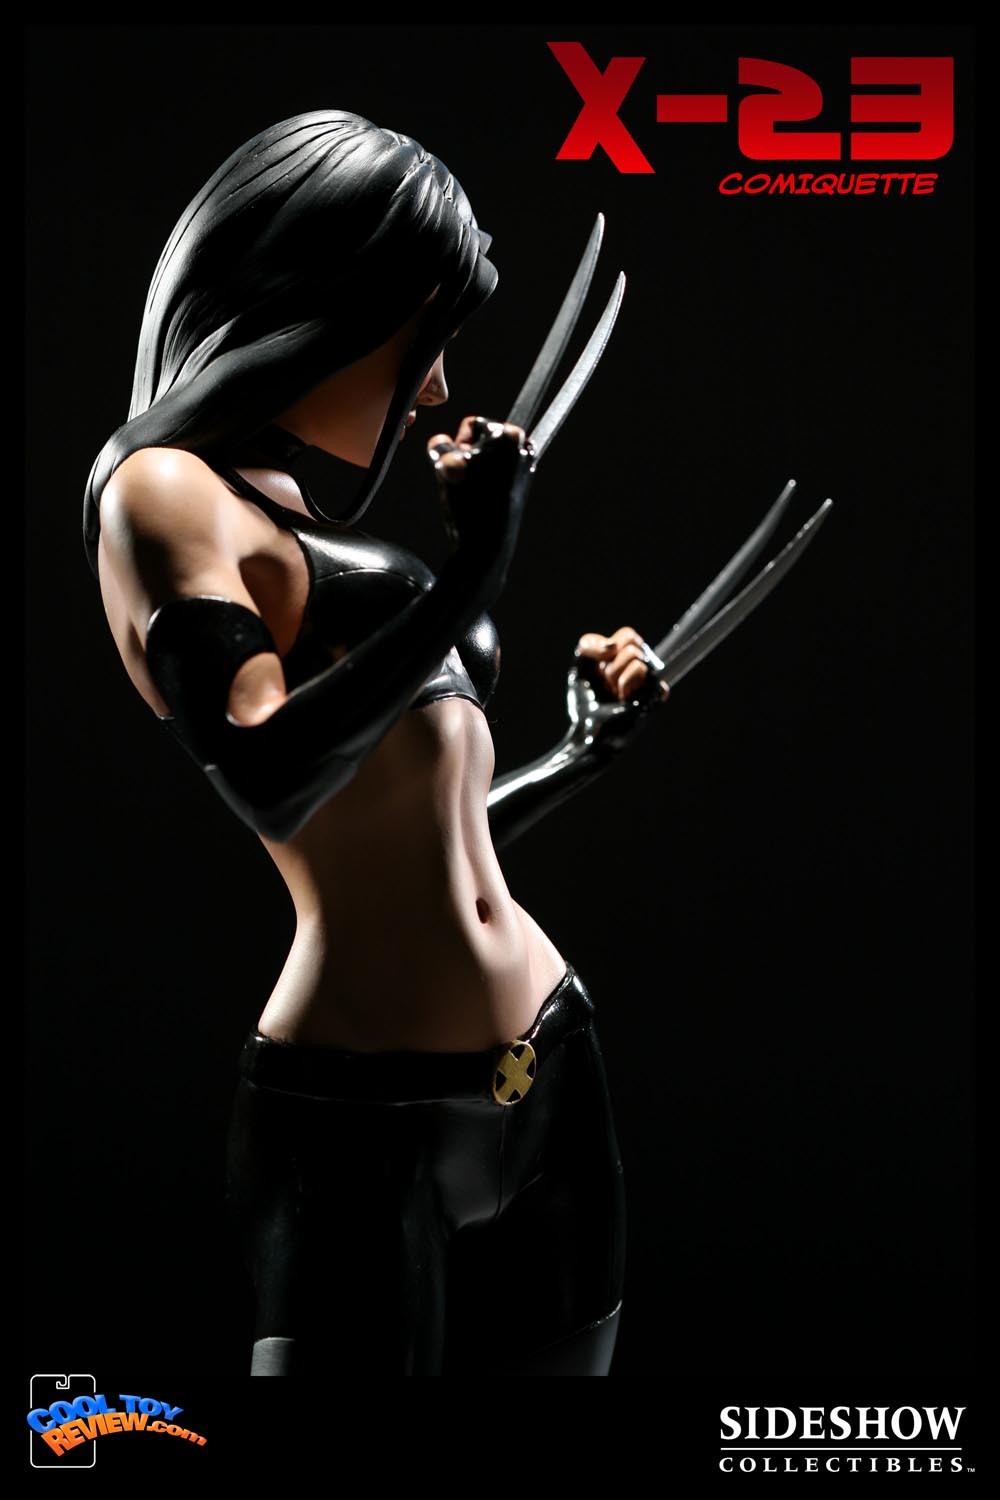 X-23 Comiquette from the Marvel Comics line by Sideshow Collectibles